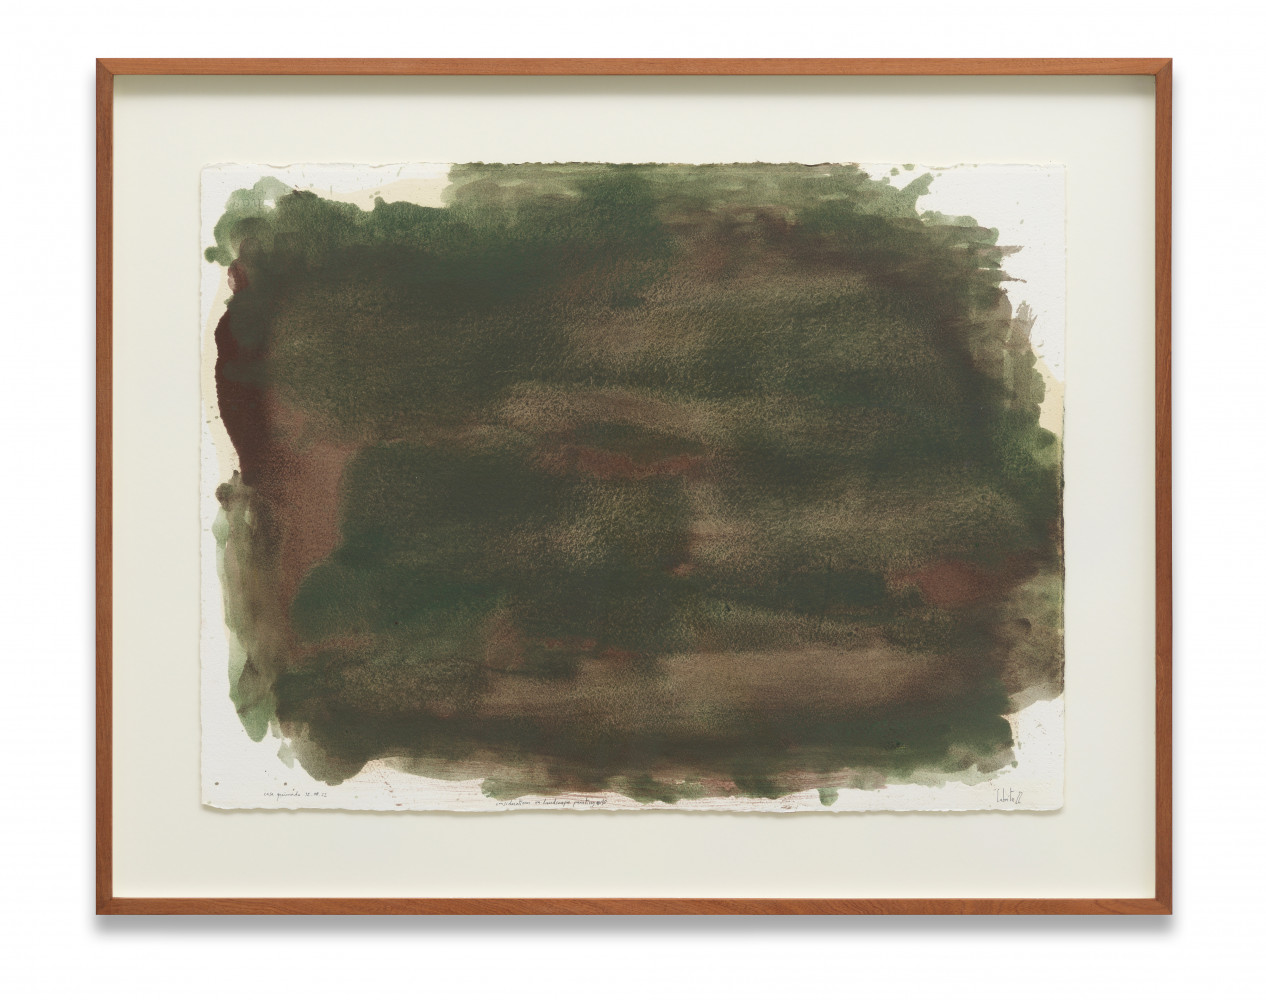 Pedro Cabrita Reis, ‘Considerations on landscape painting #10’, 2022, Oil on 640 gr Arches paper